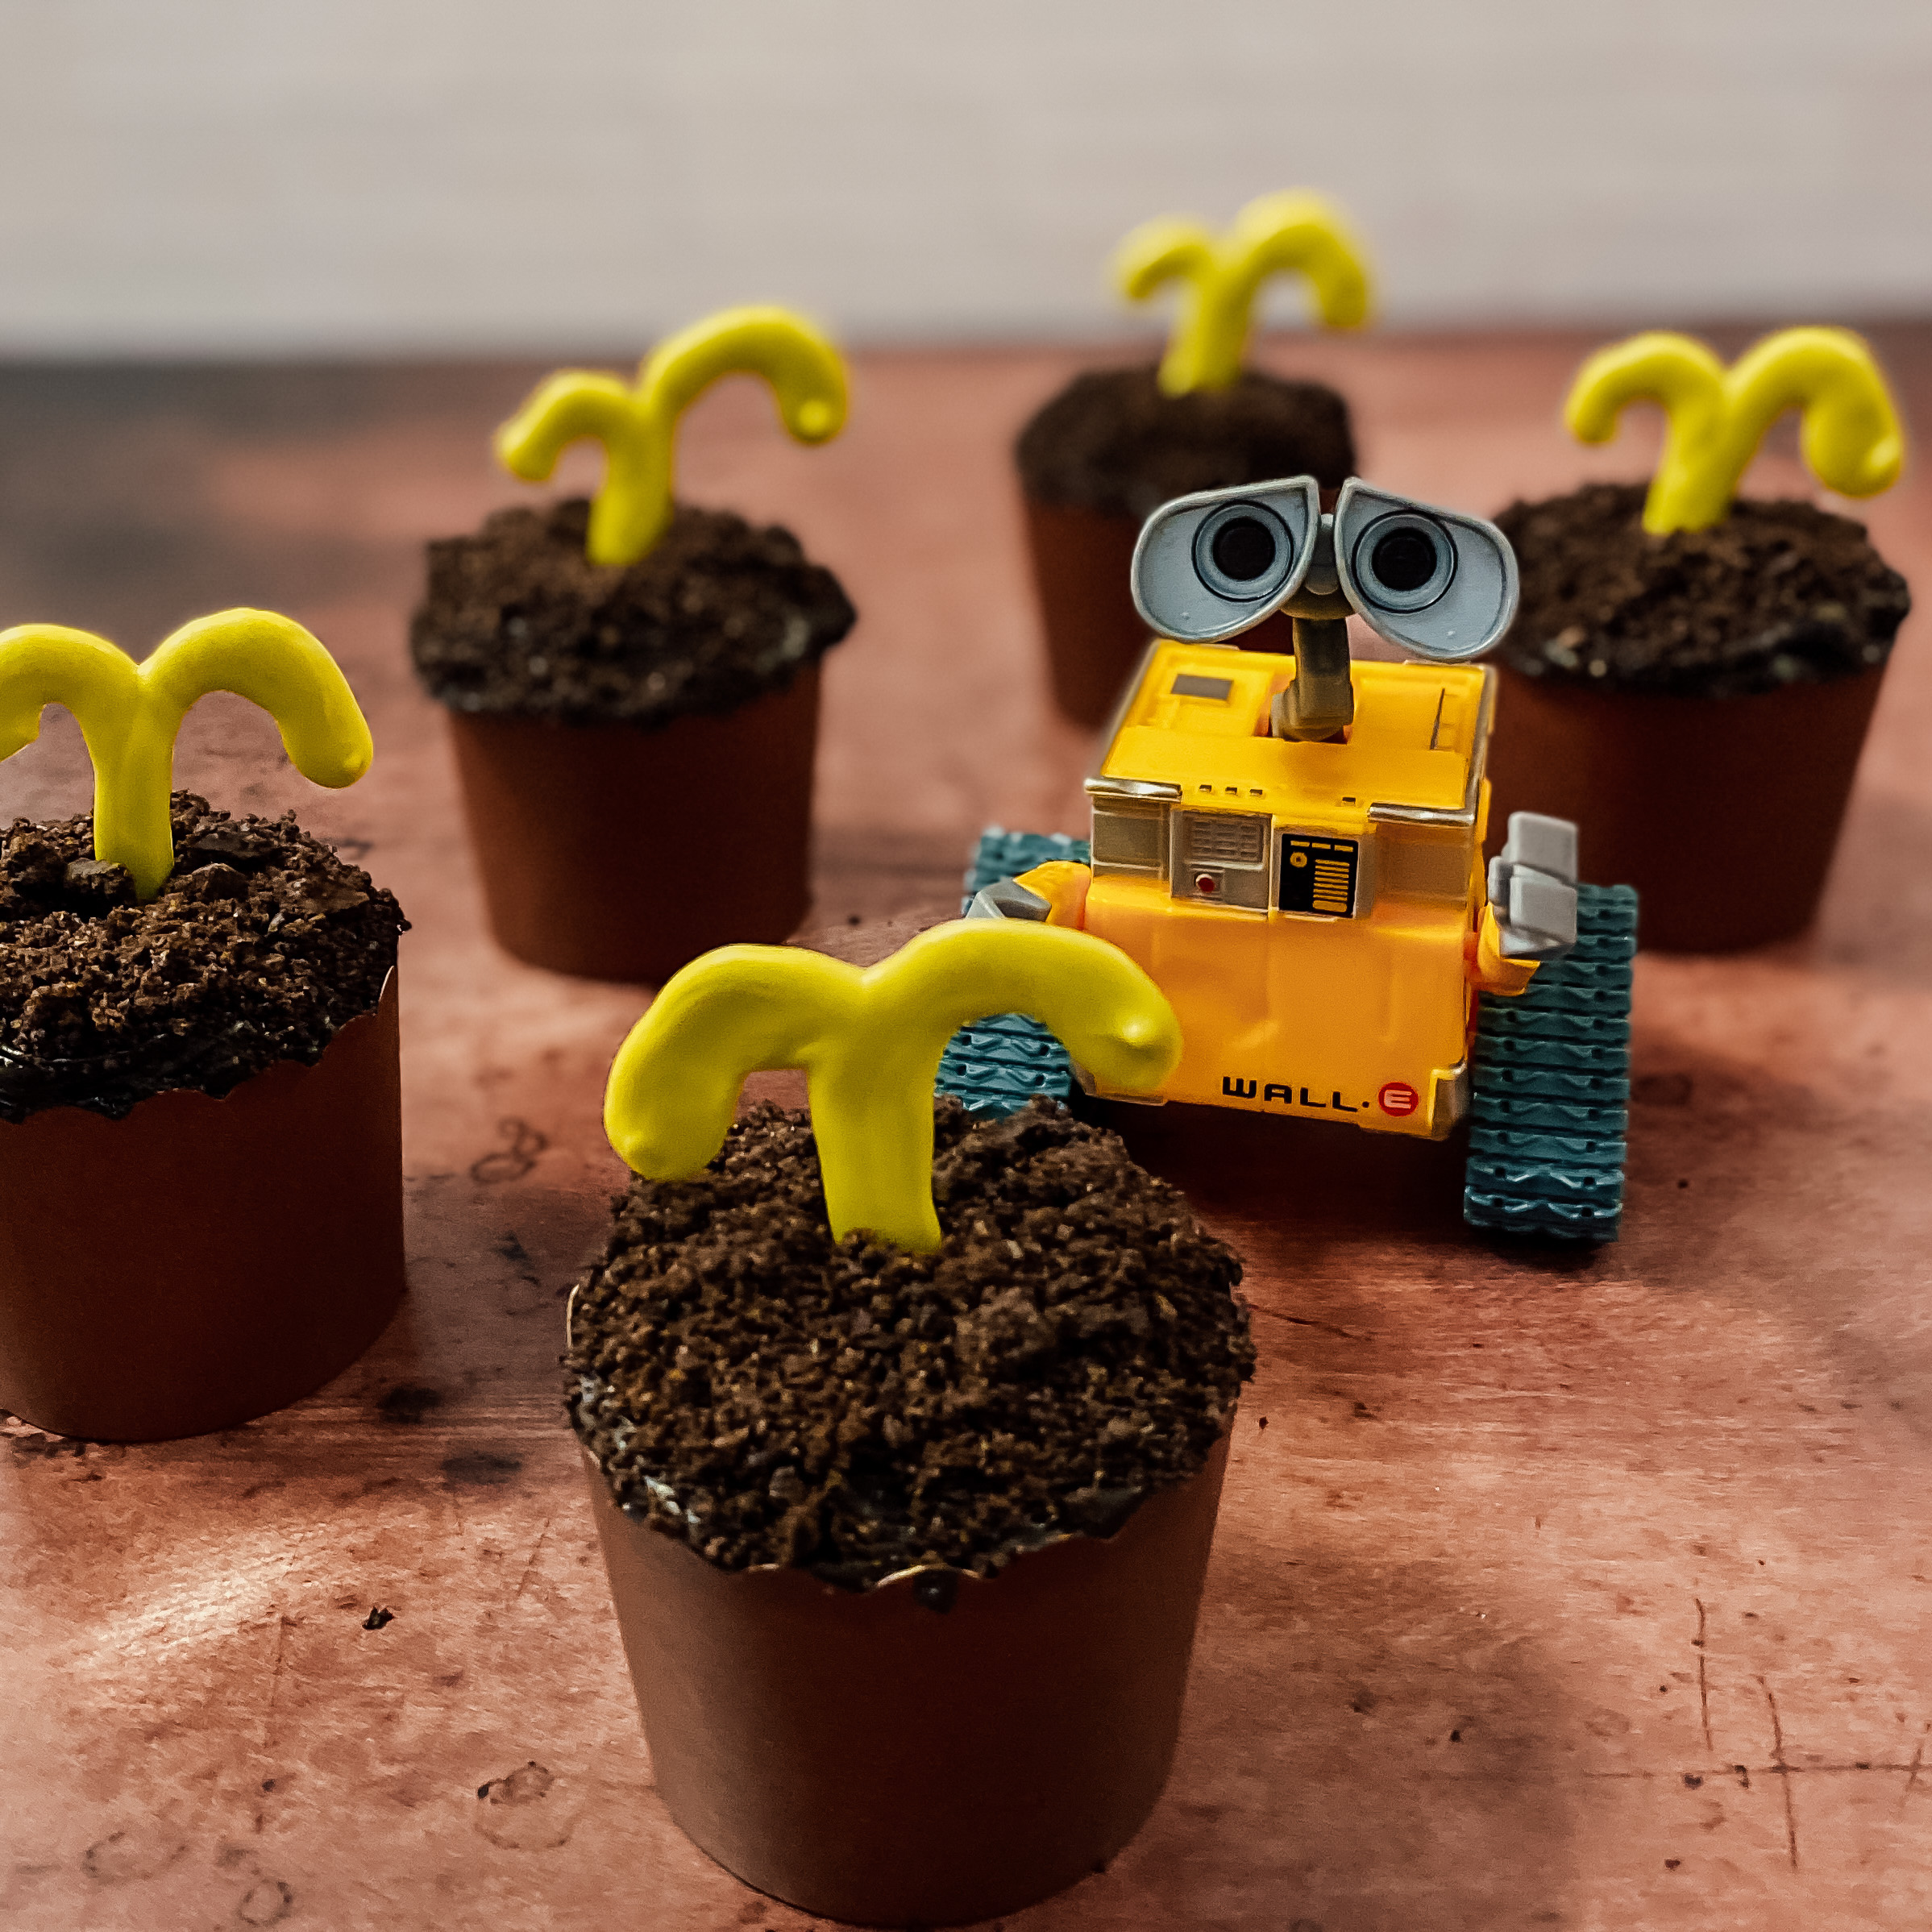 WALL-E Sprout Cupcakes (chocolate cupcakes with Oreo dirt and chocolate sprout) with a plastic figure of WALL-E